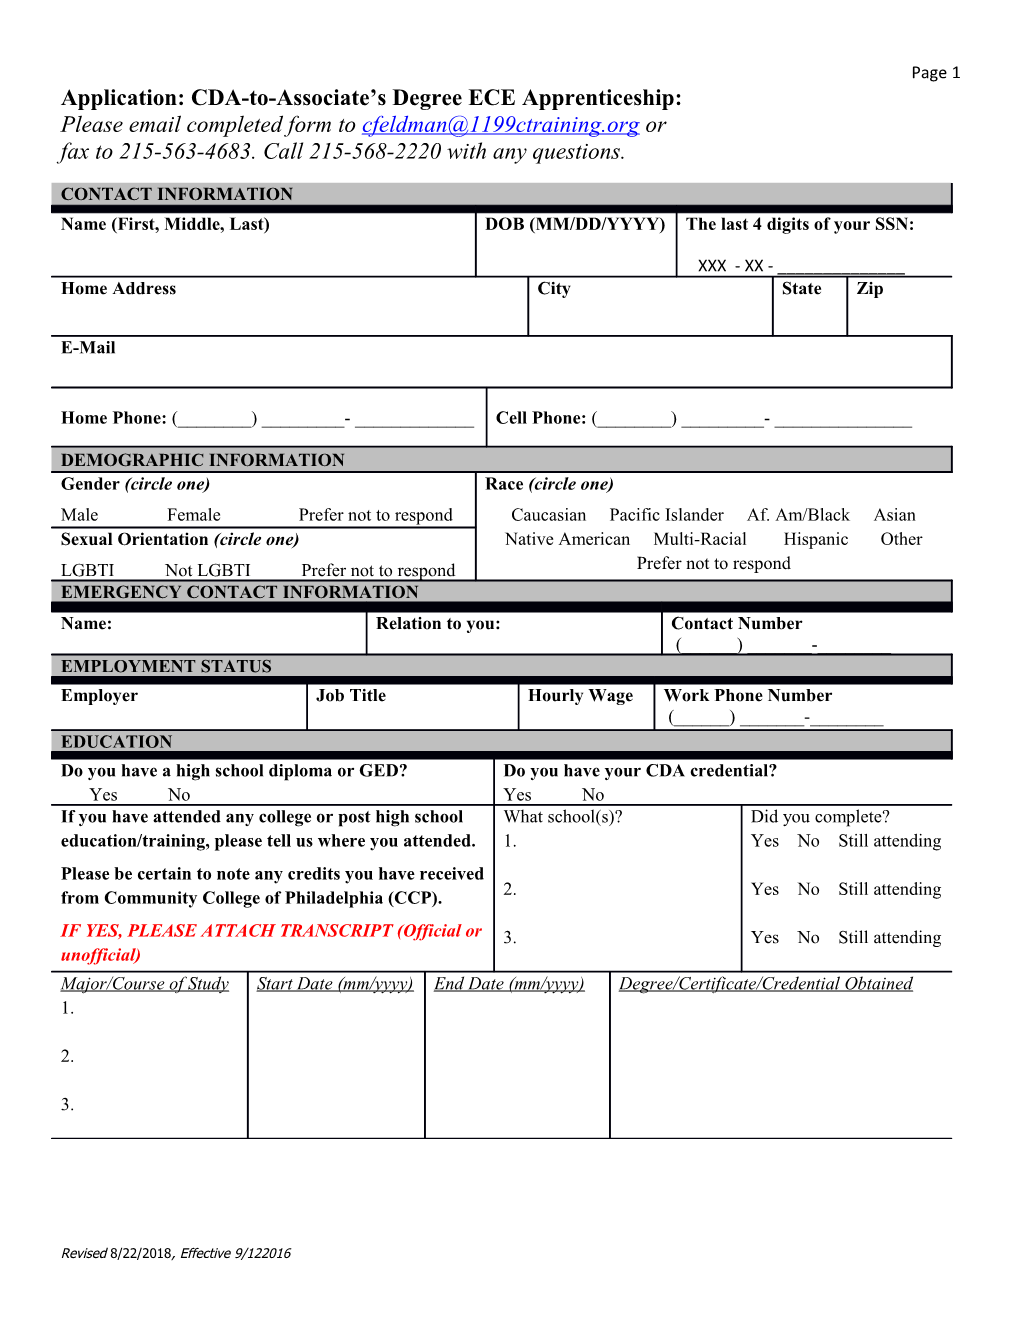 Please Email Completed Form to Or